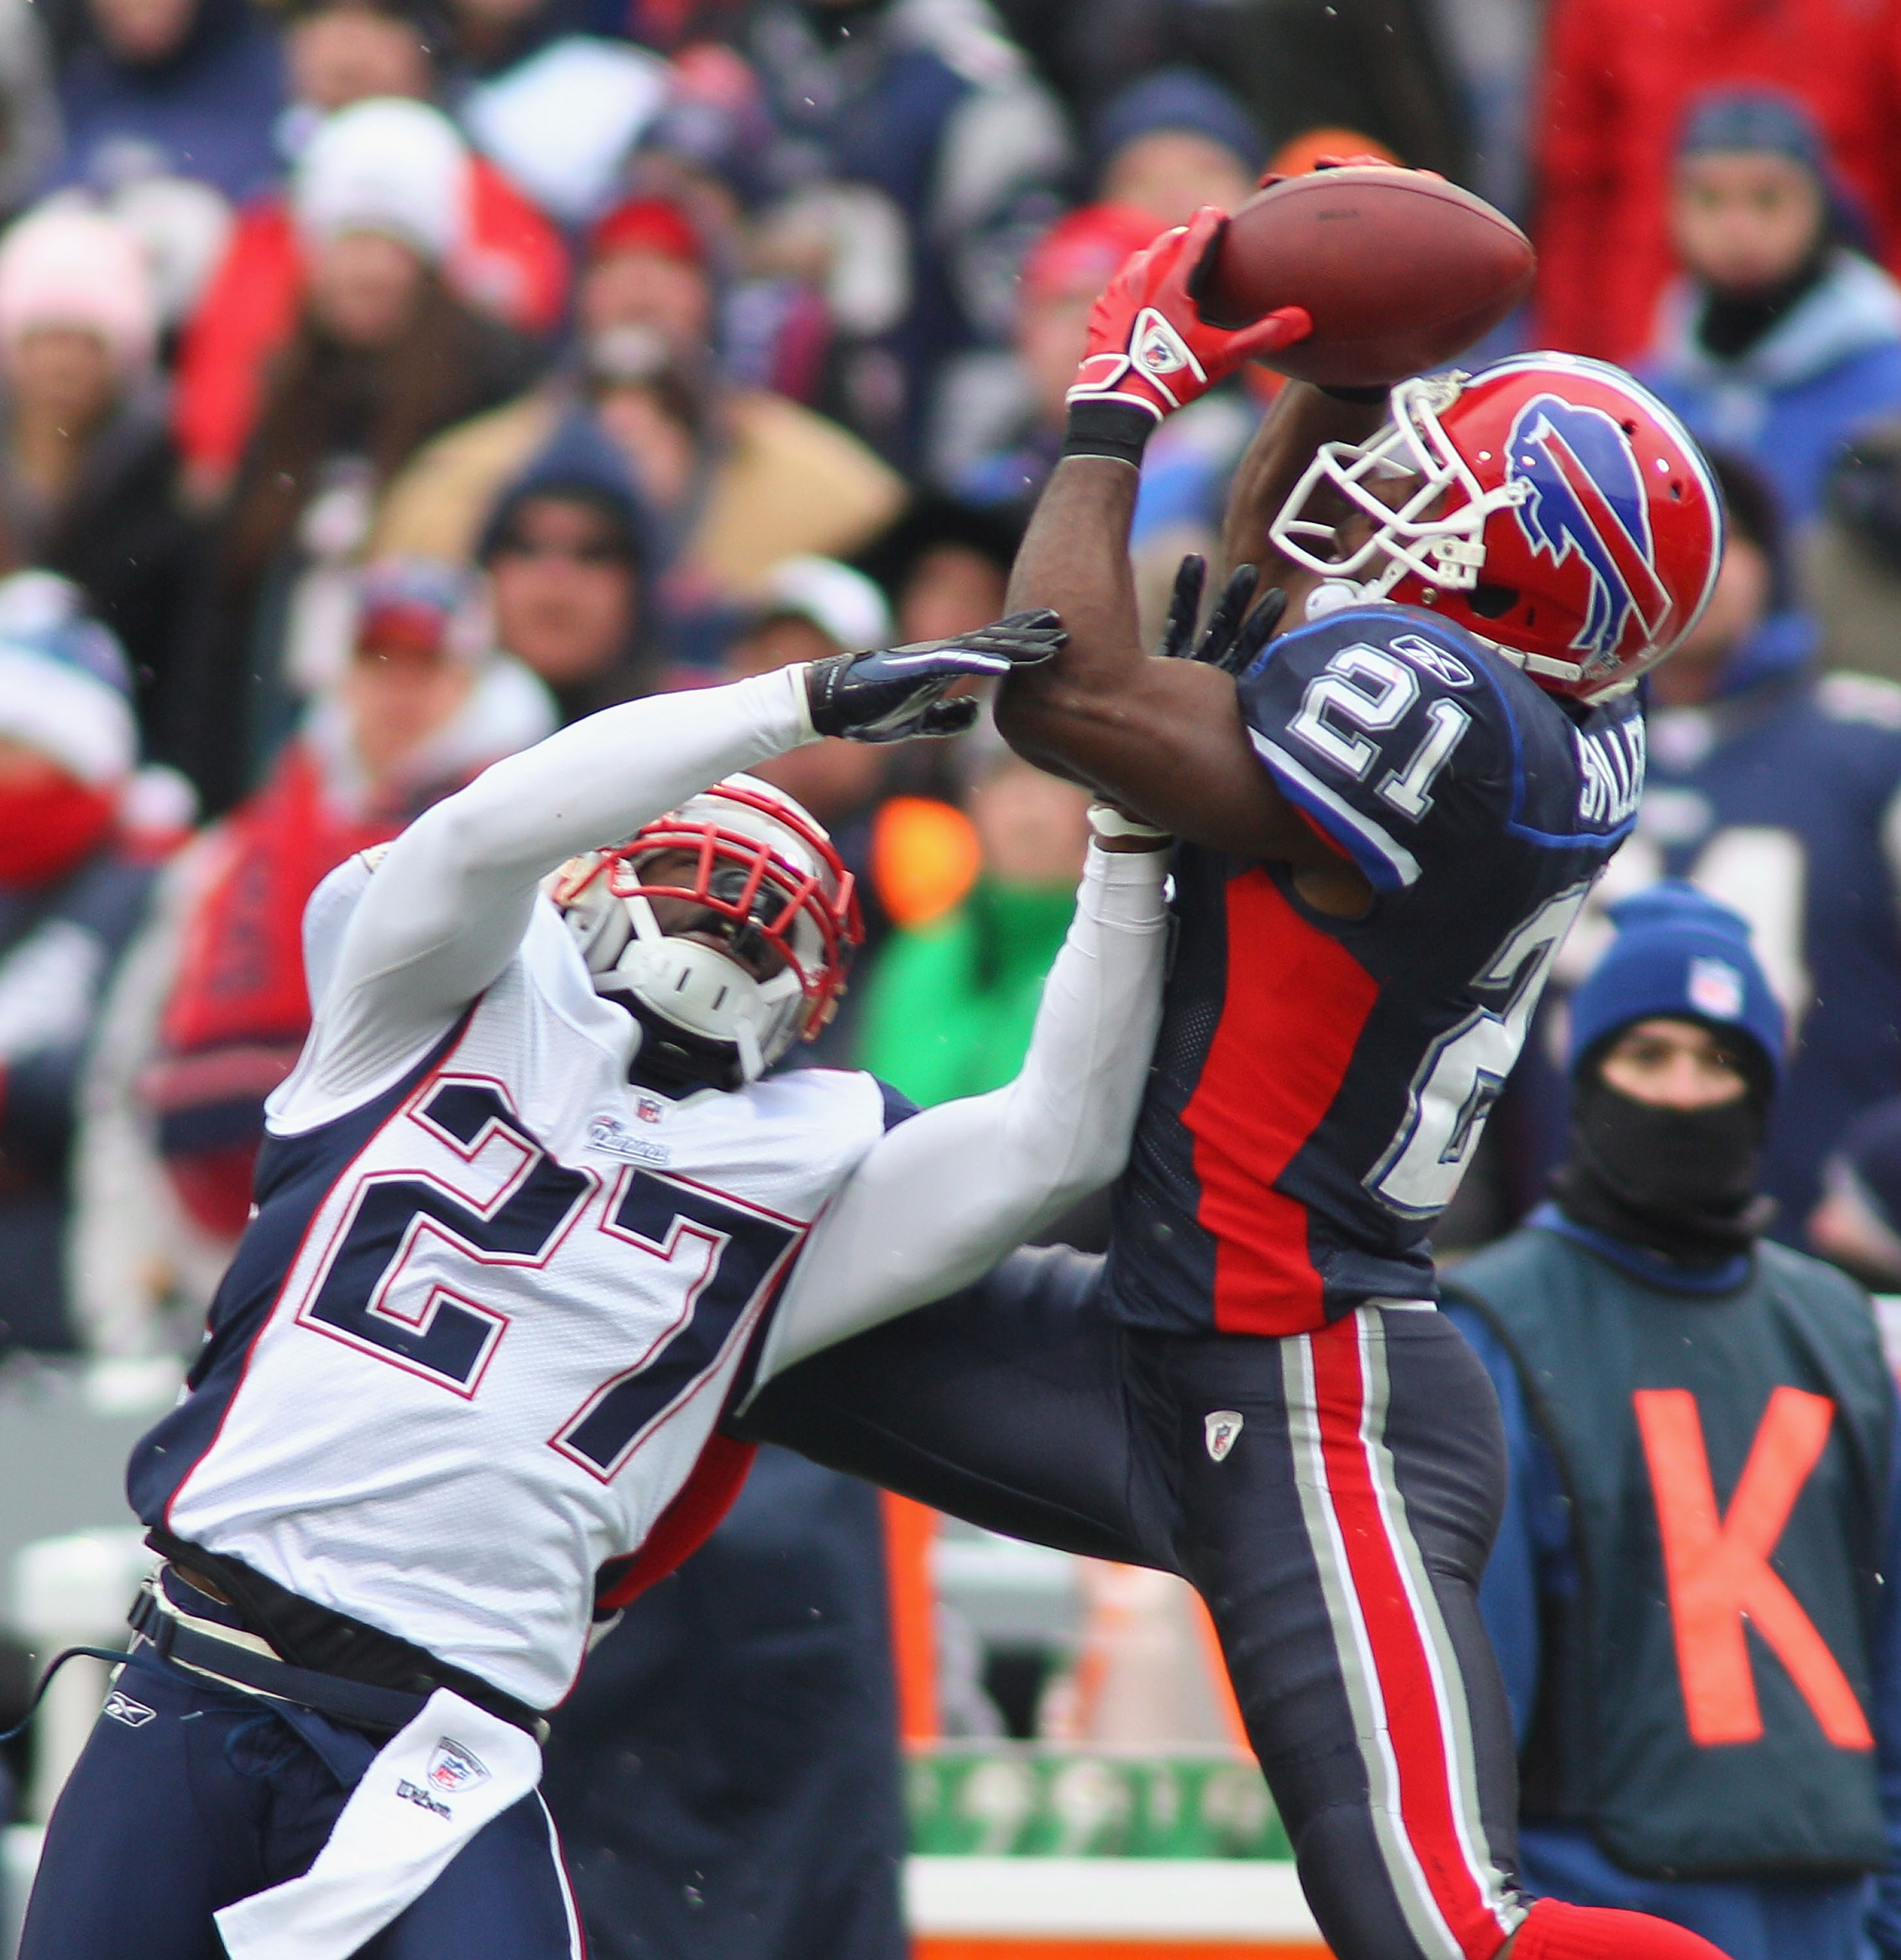 ORCHARD PARK, NY - DECEMBER 26:  C.J. Spiller #21 of the Buffalo Bills makes a catch against Kyle Arrington #27 of the New England Patriots at Ralph Wilson Stadium on December 26, 2010 in Orchard Park, New York.  (Photo by Rick Stewart/Getty Images)